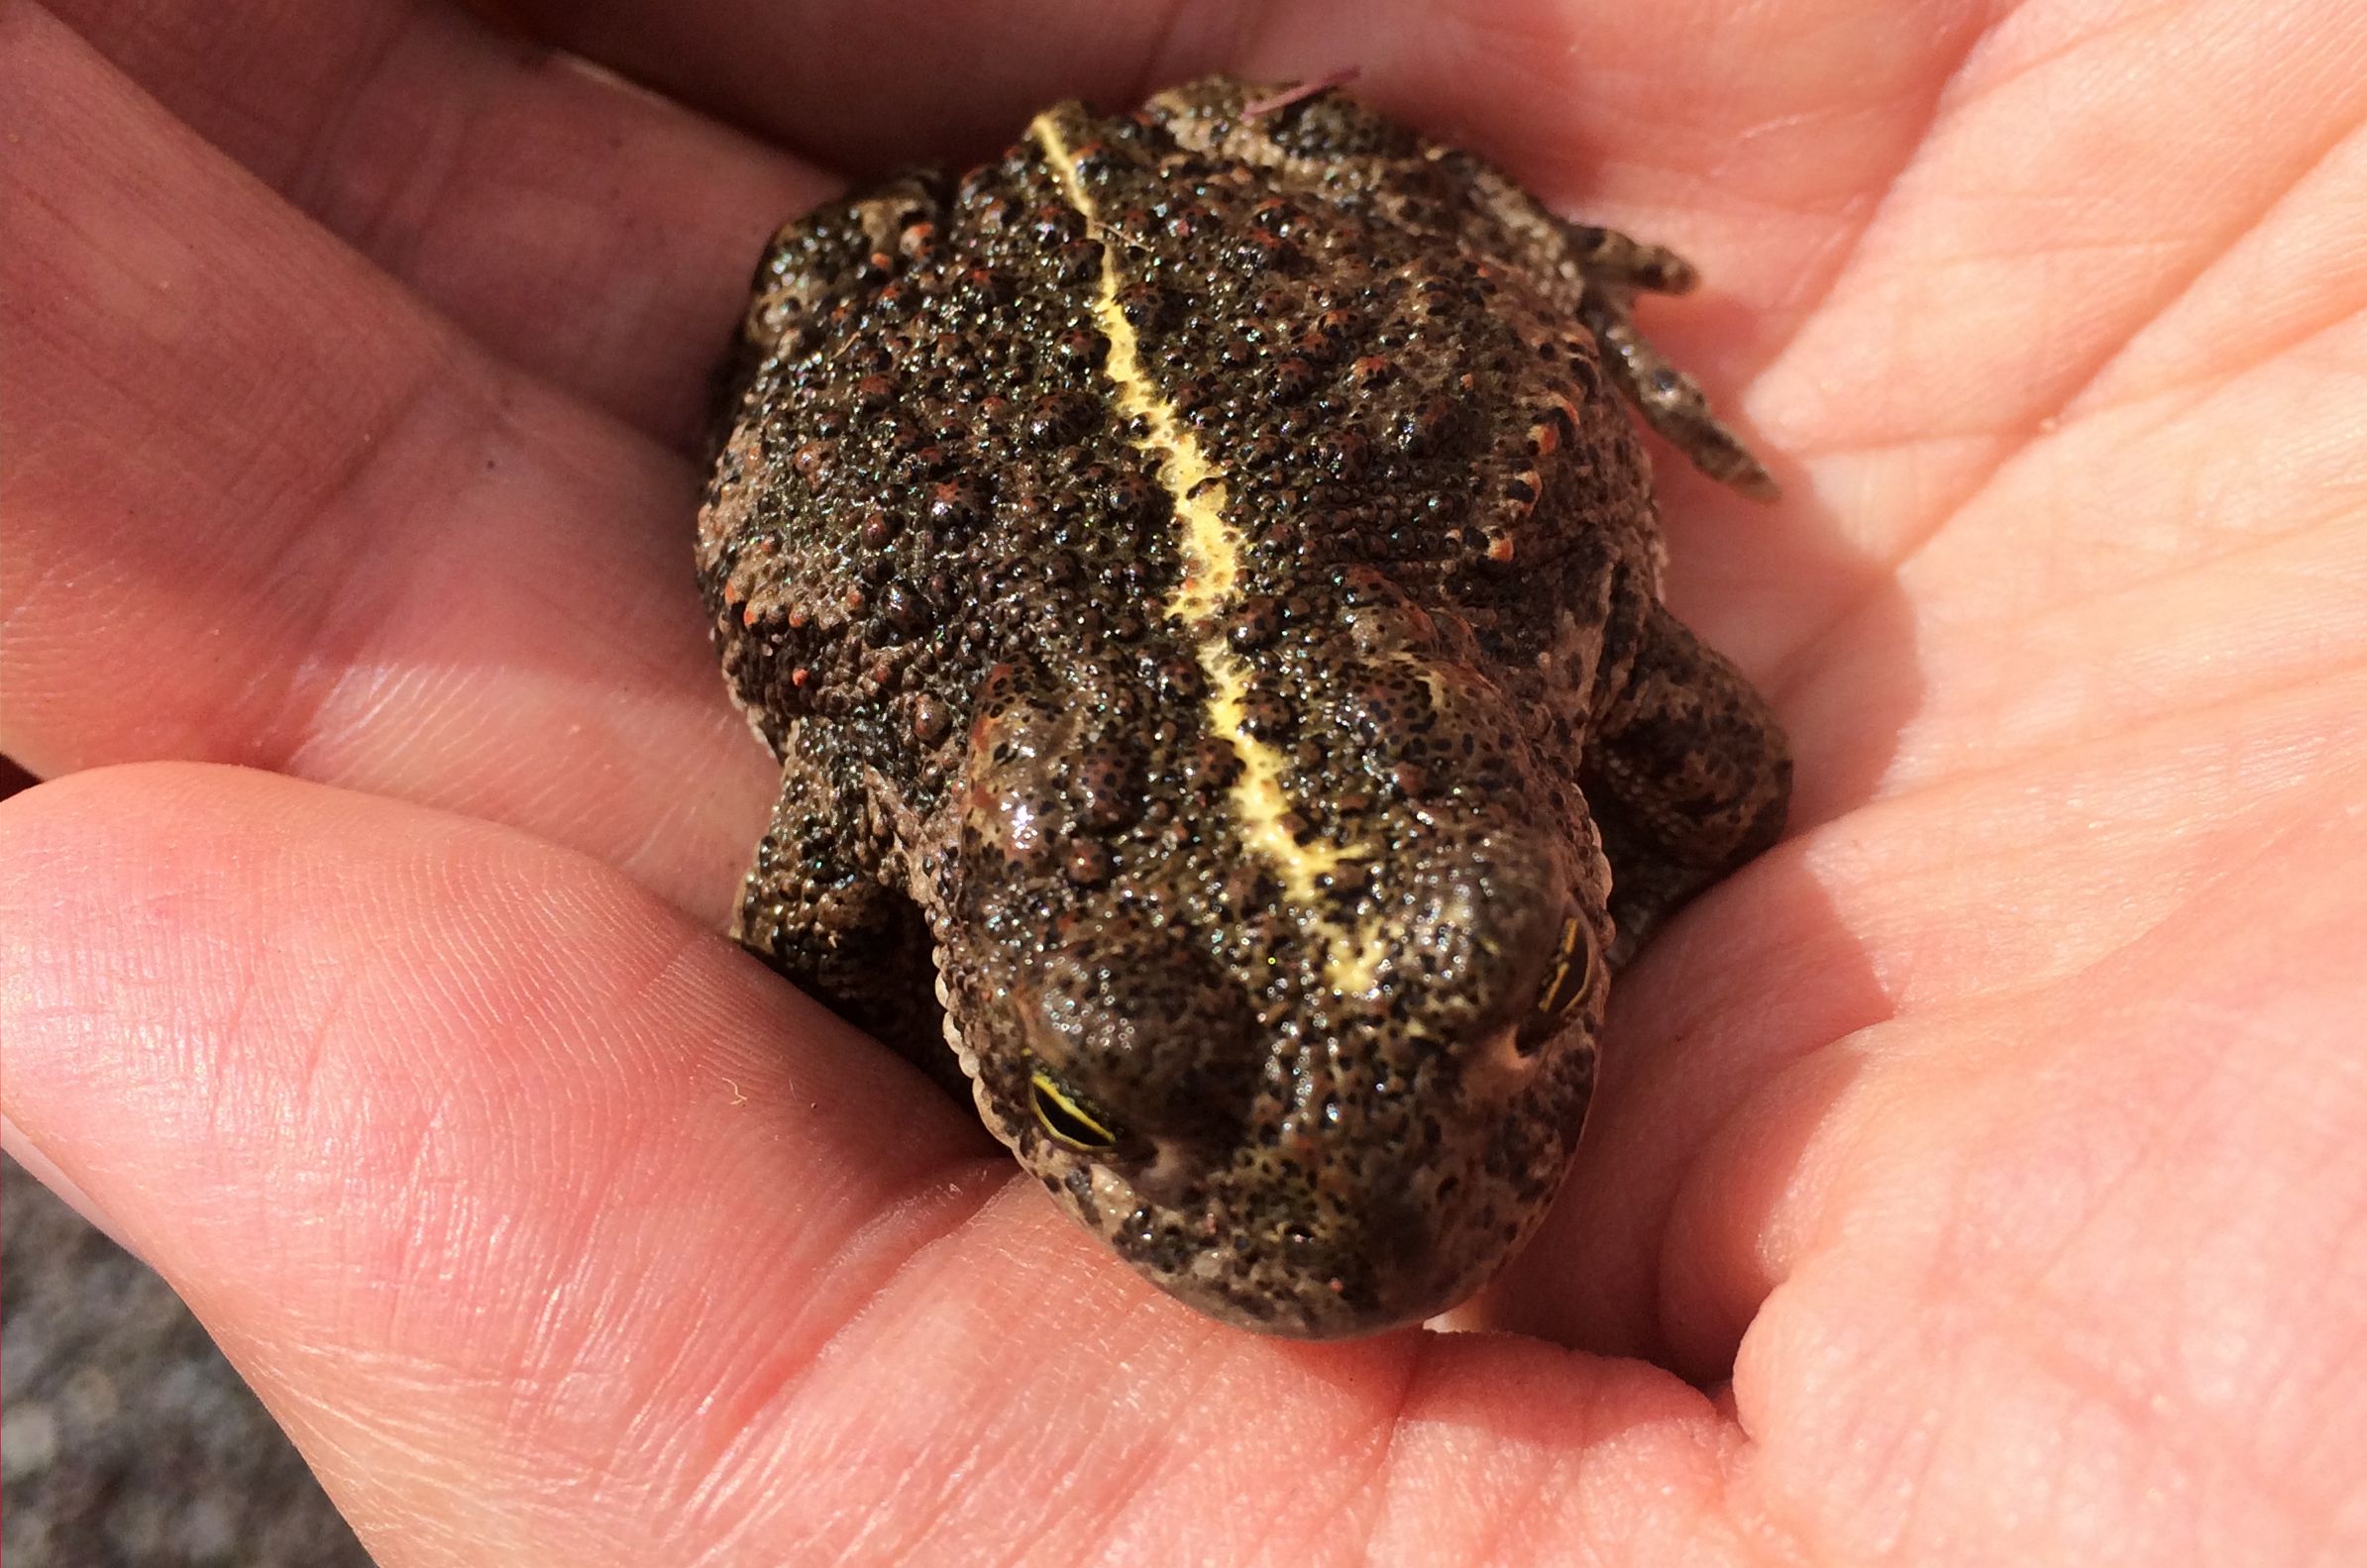 Natterjack Toad image small